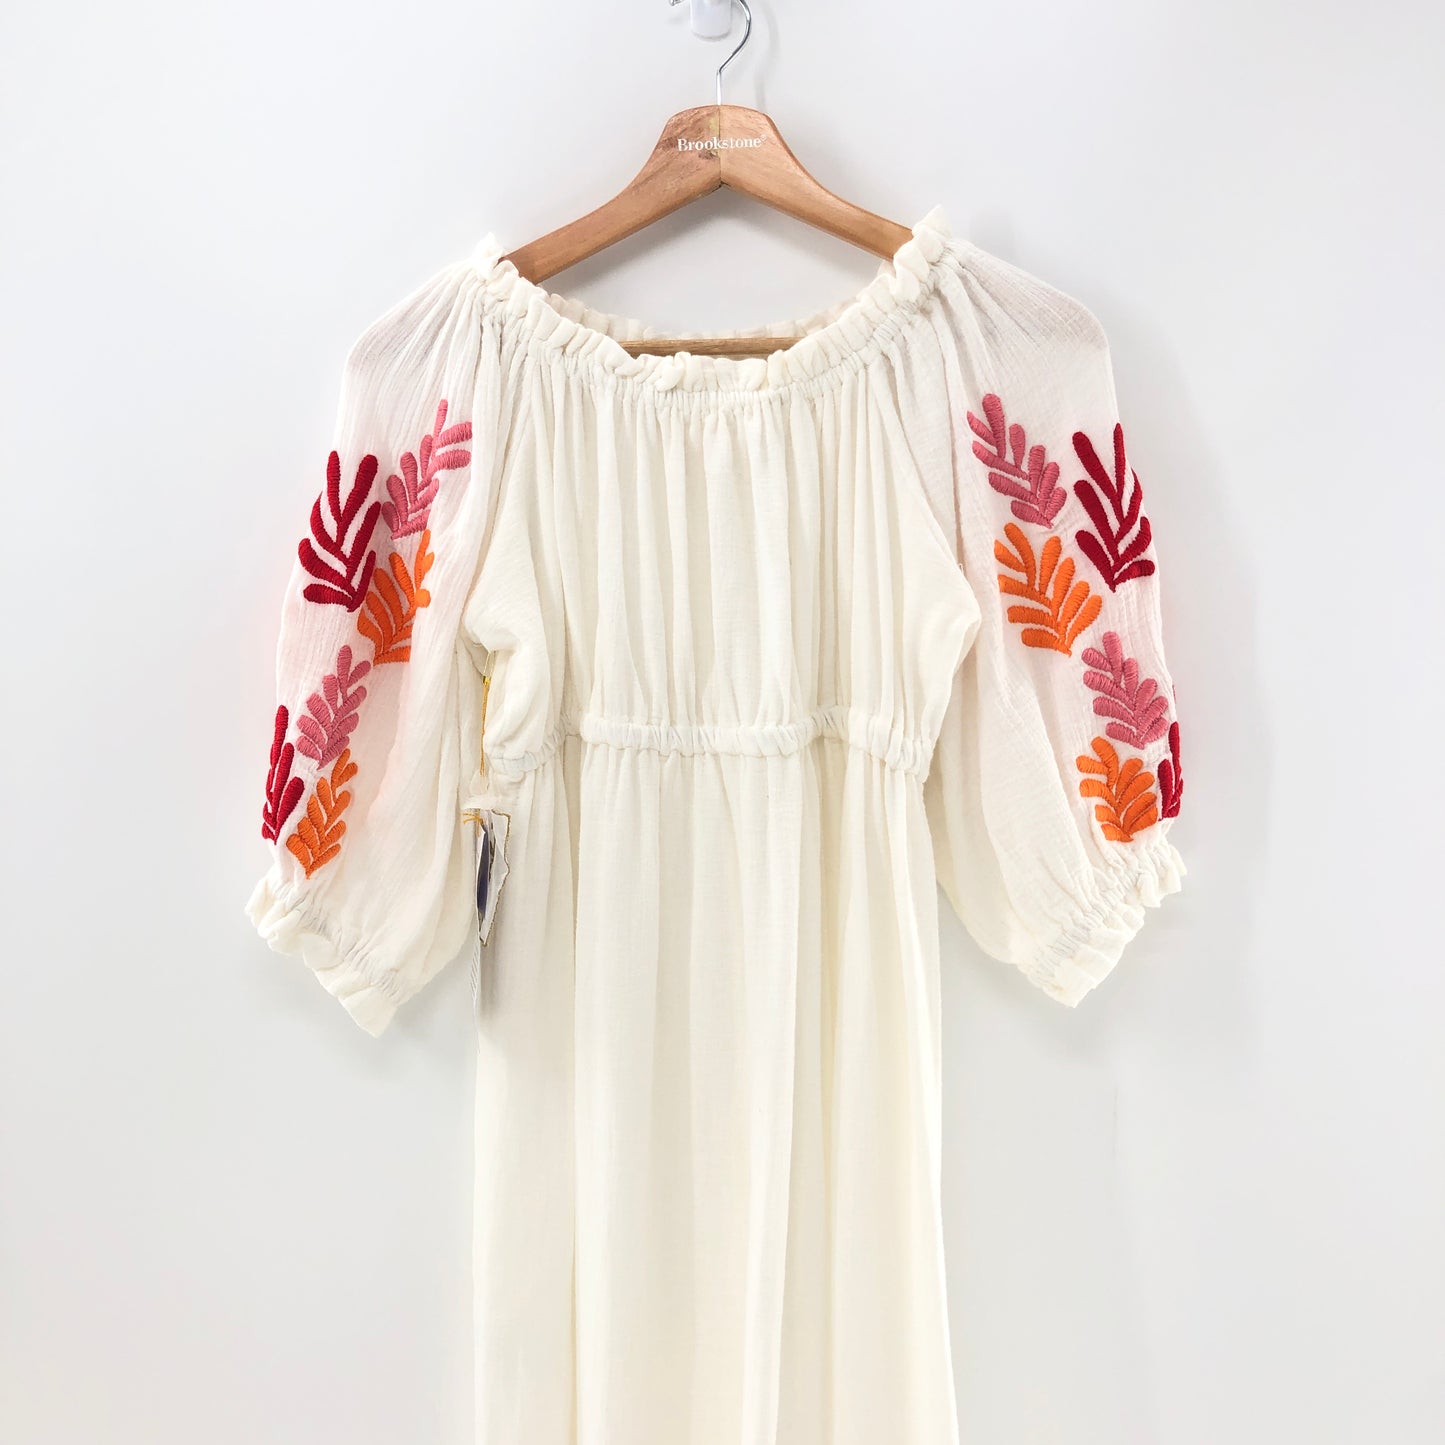 Sundress Poly Dress in Tulum White & Mix Red Embroideries